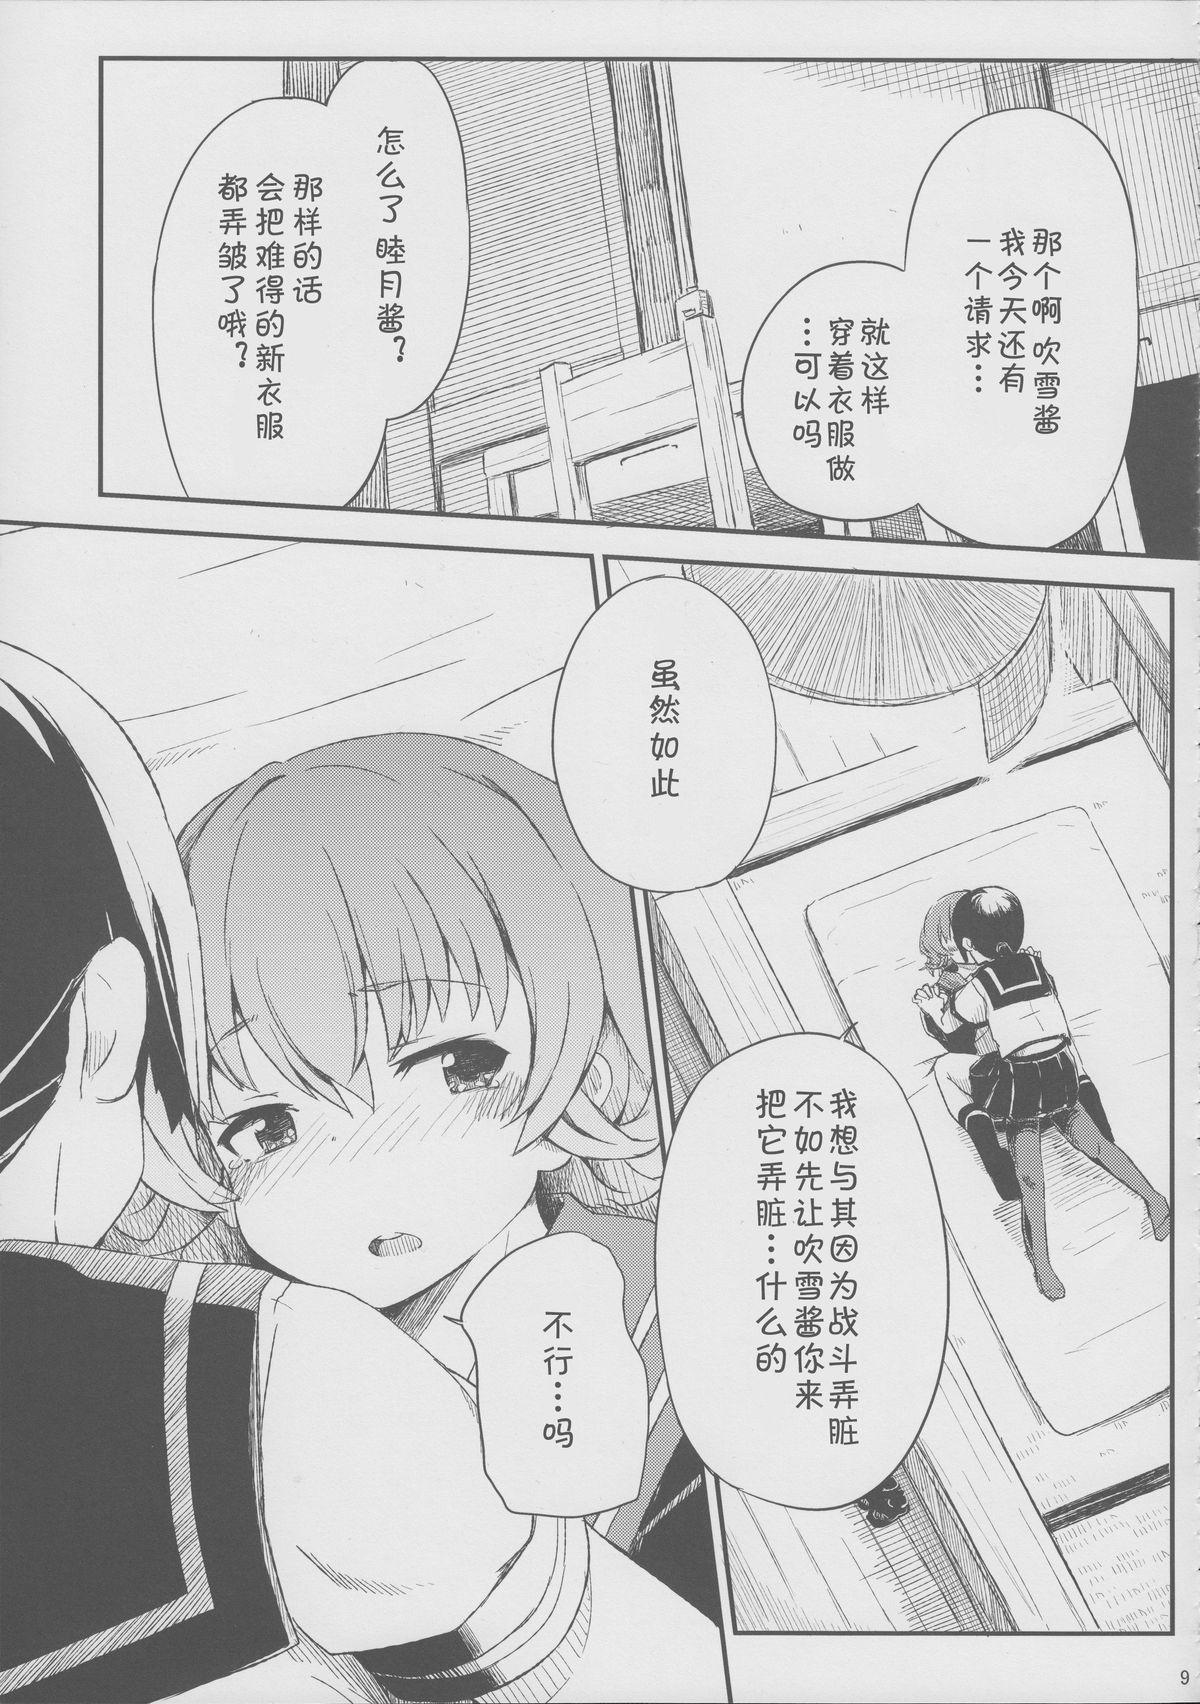 Letsdoeit late flowering - Kantai collection French - Page 11